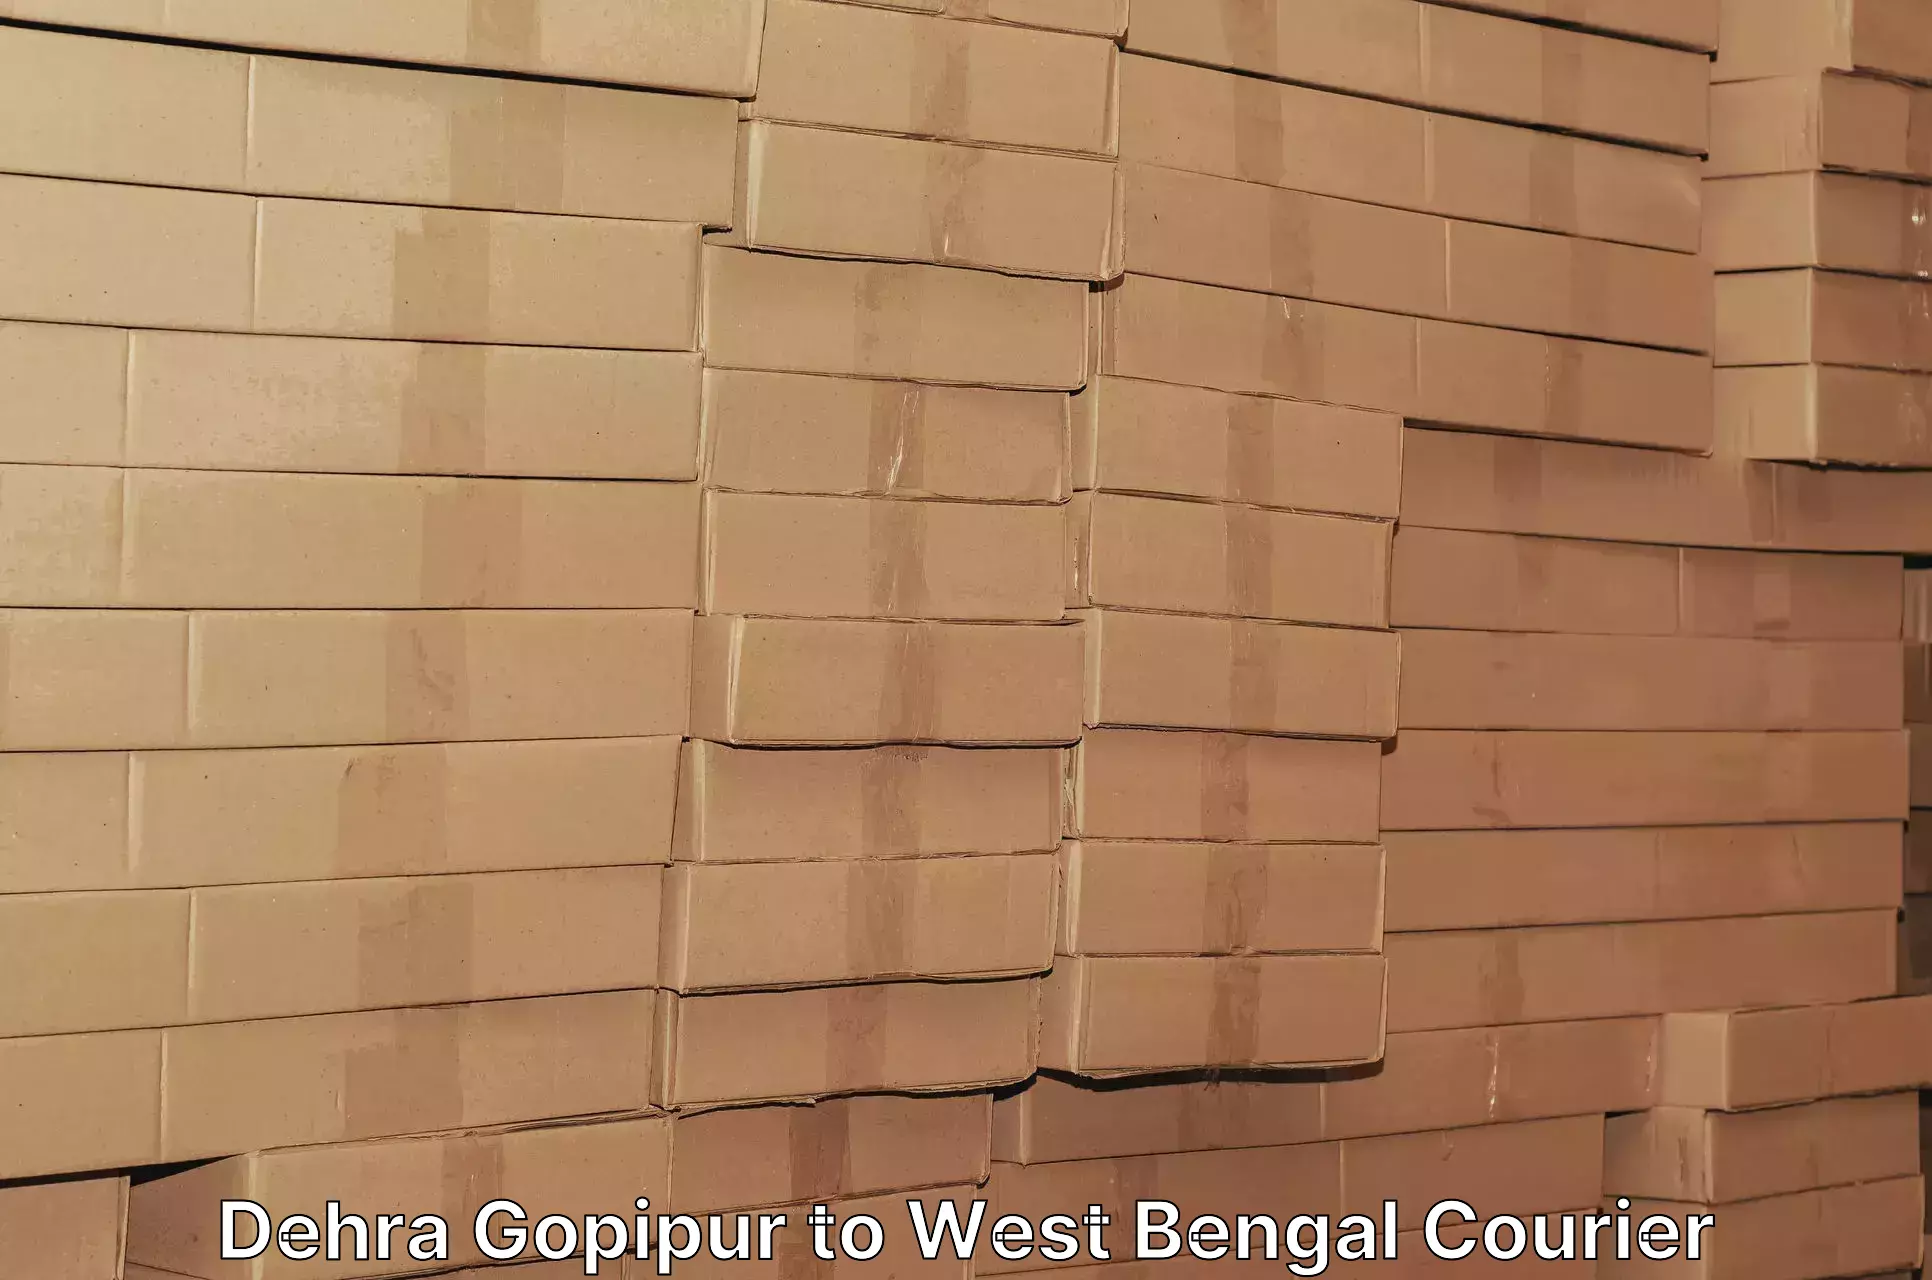 Courier service booking Dehra Gopipur to Alipore